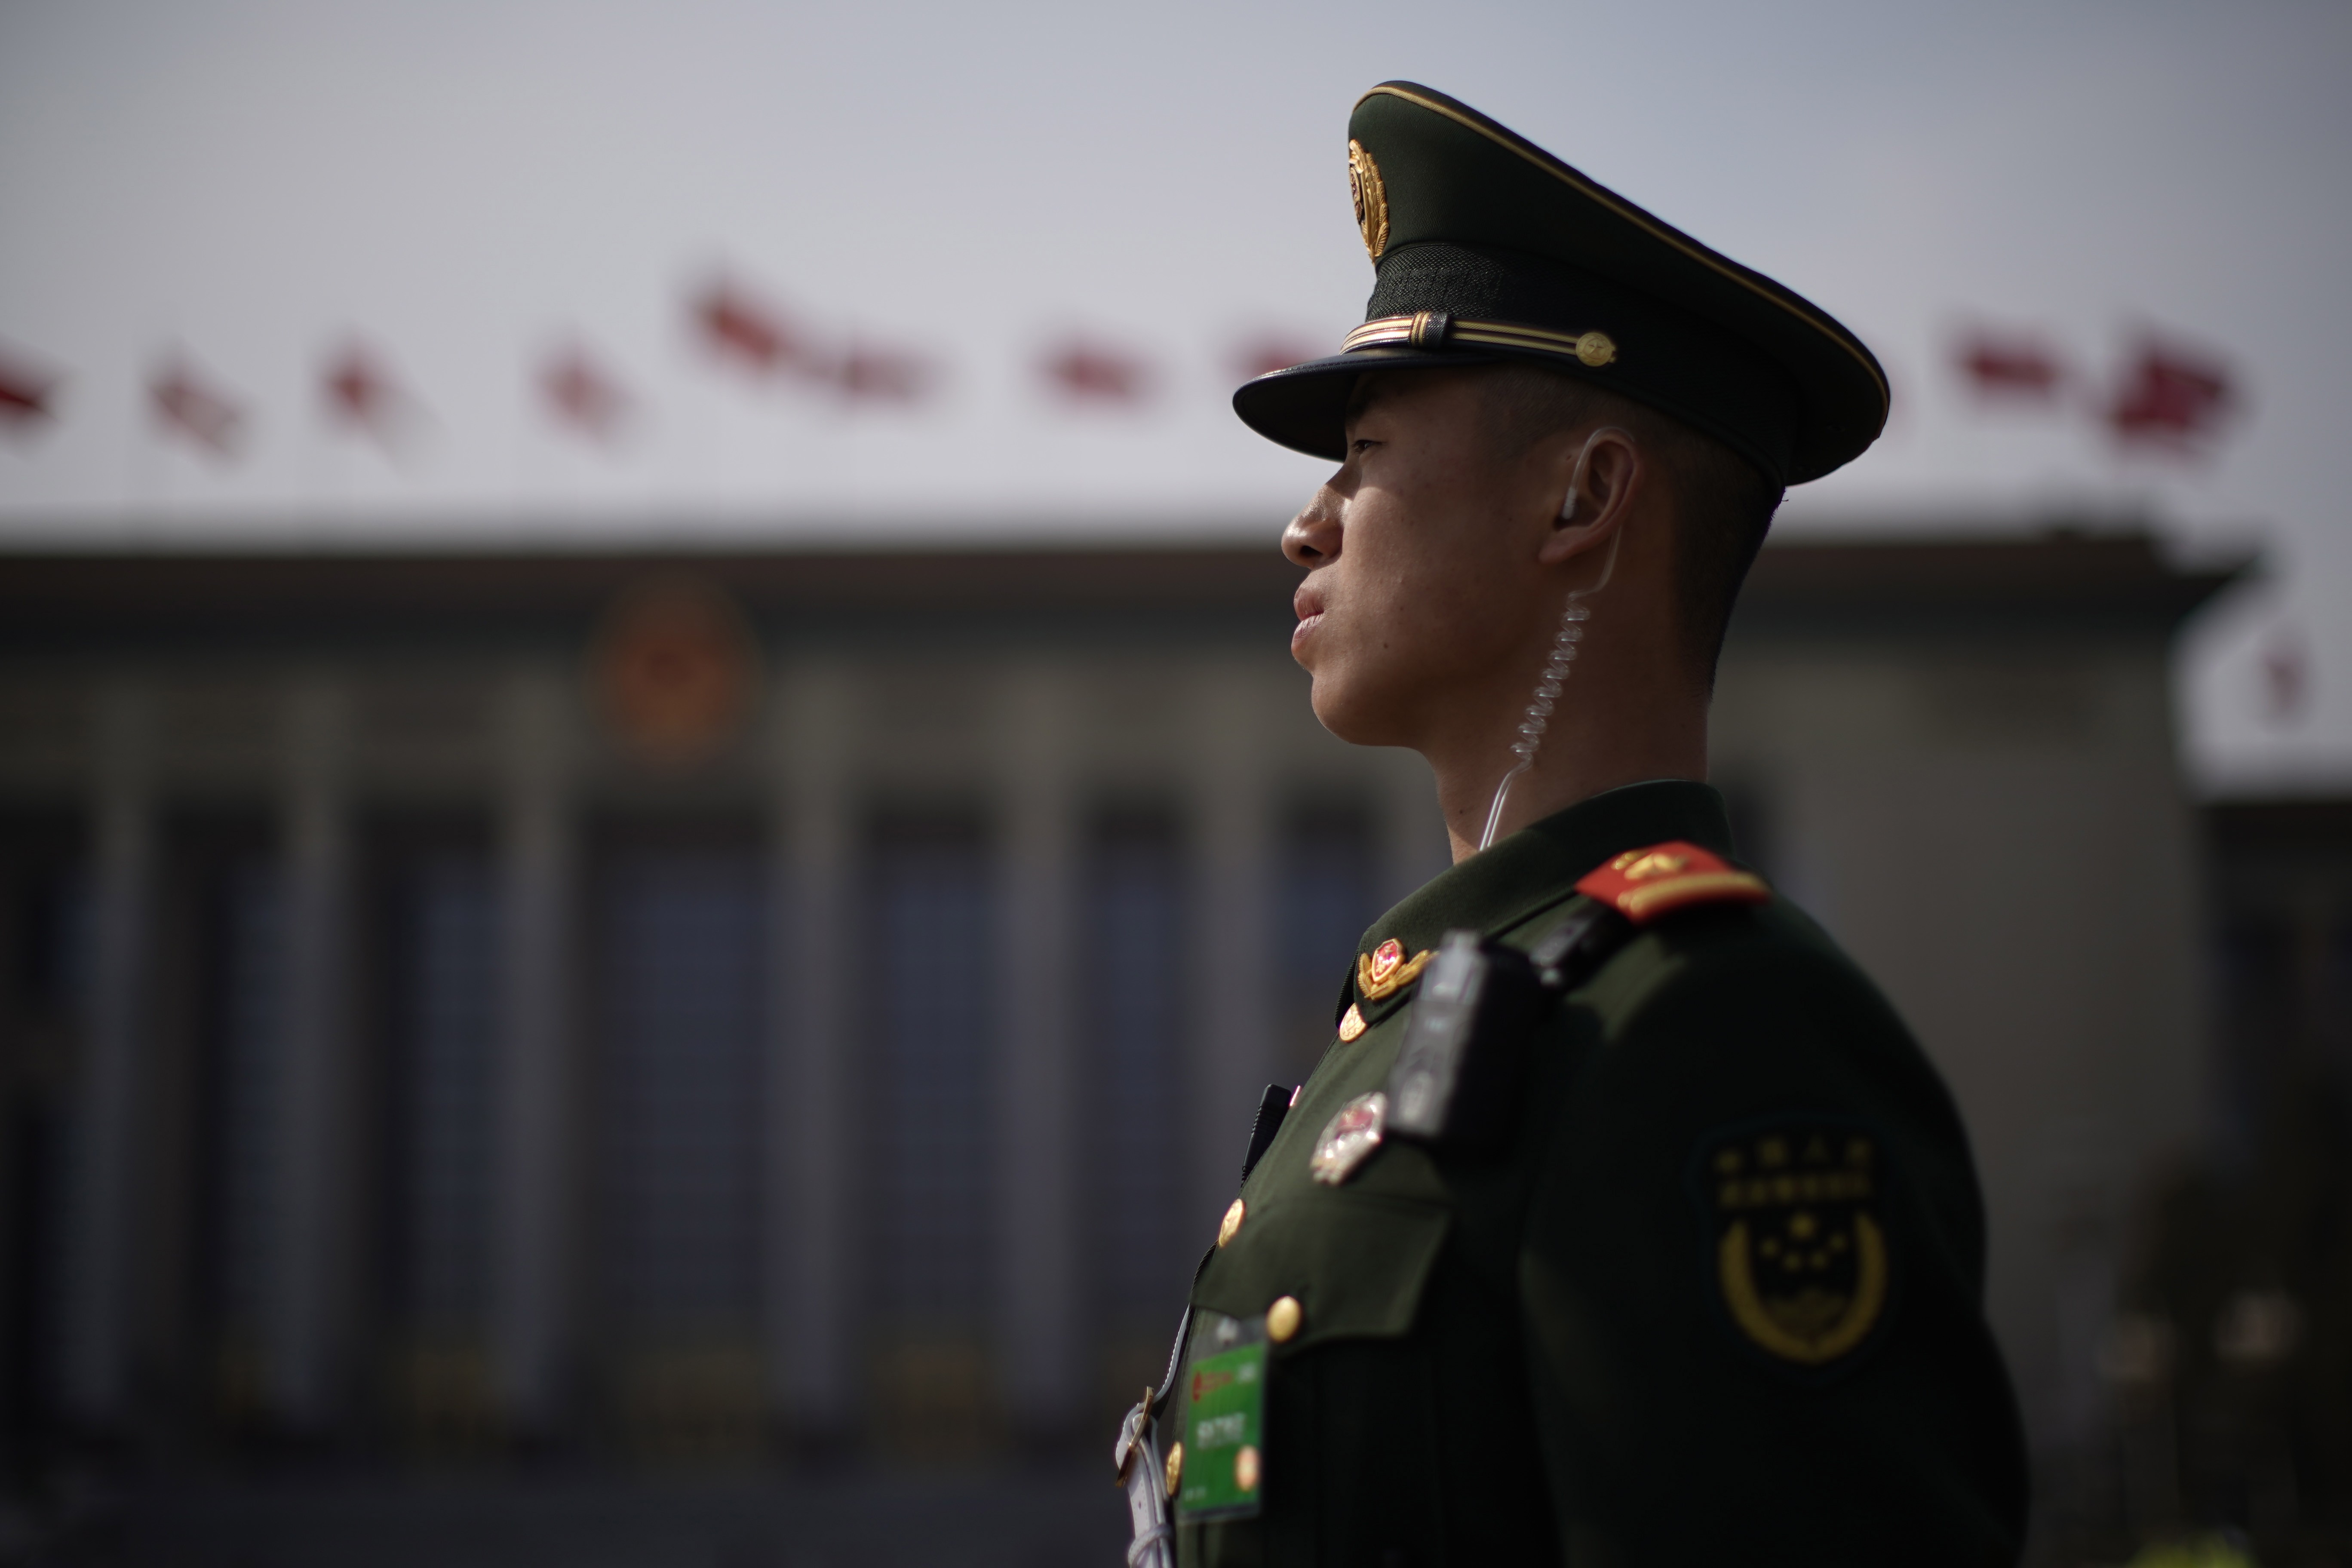 A People's Liberation Army soldier stands guard March 8 ahead of the second plenary session of the National People's Congress outside the Great Hall of the People in Beijing. Photo: EPA-EFE